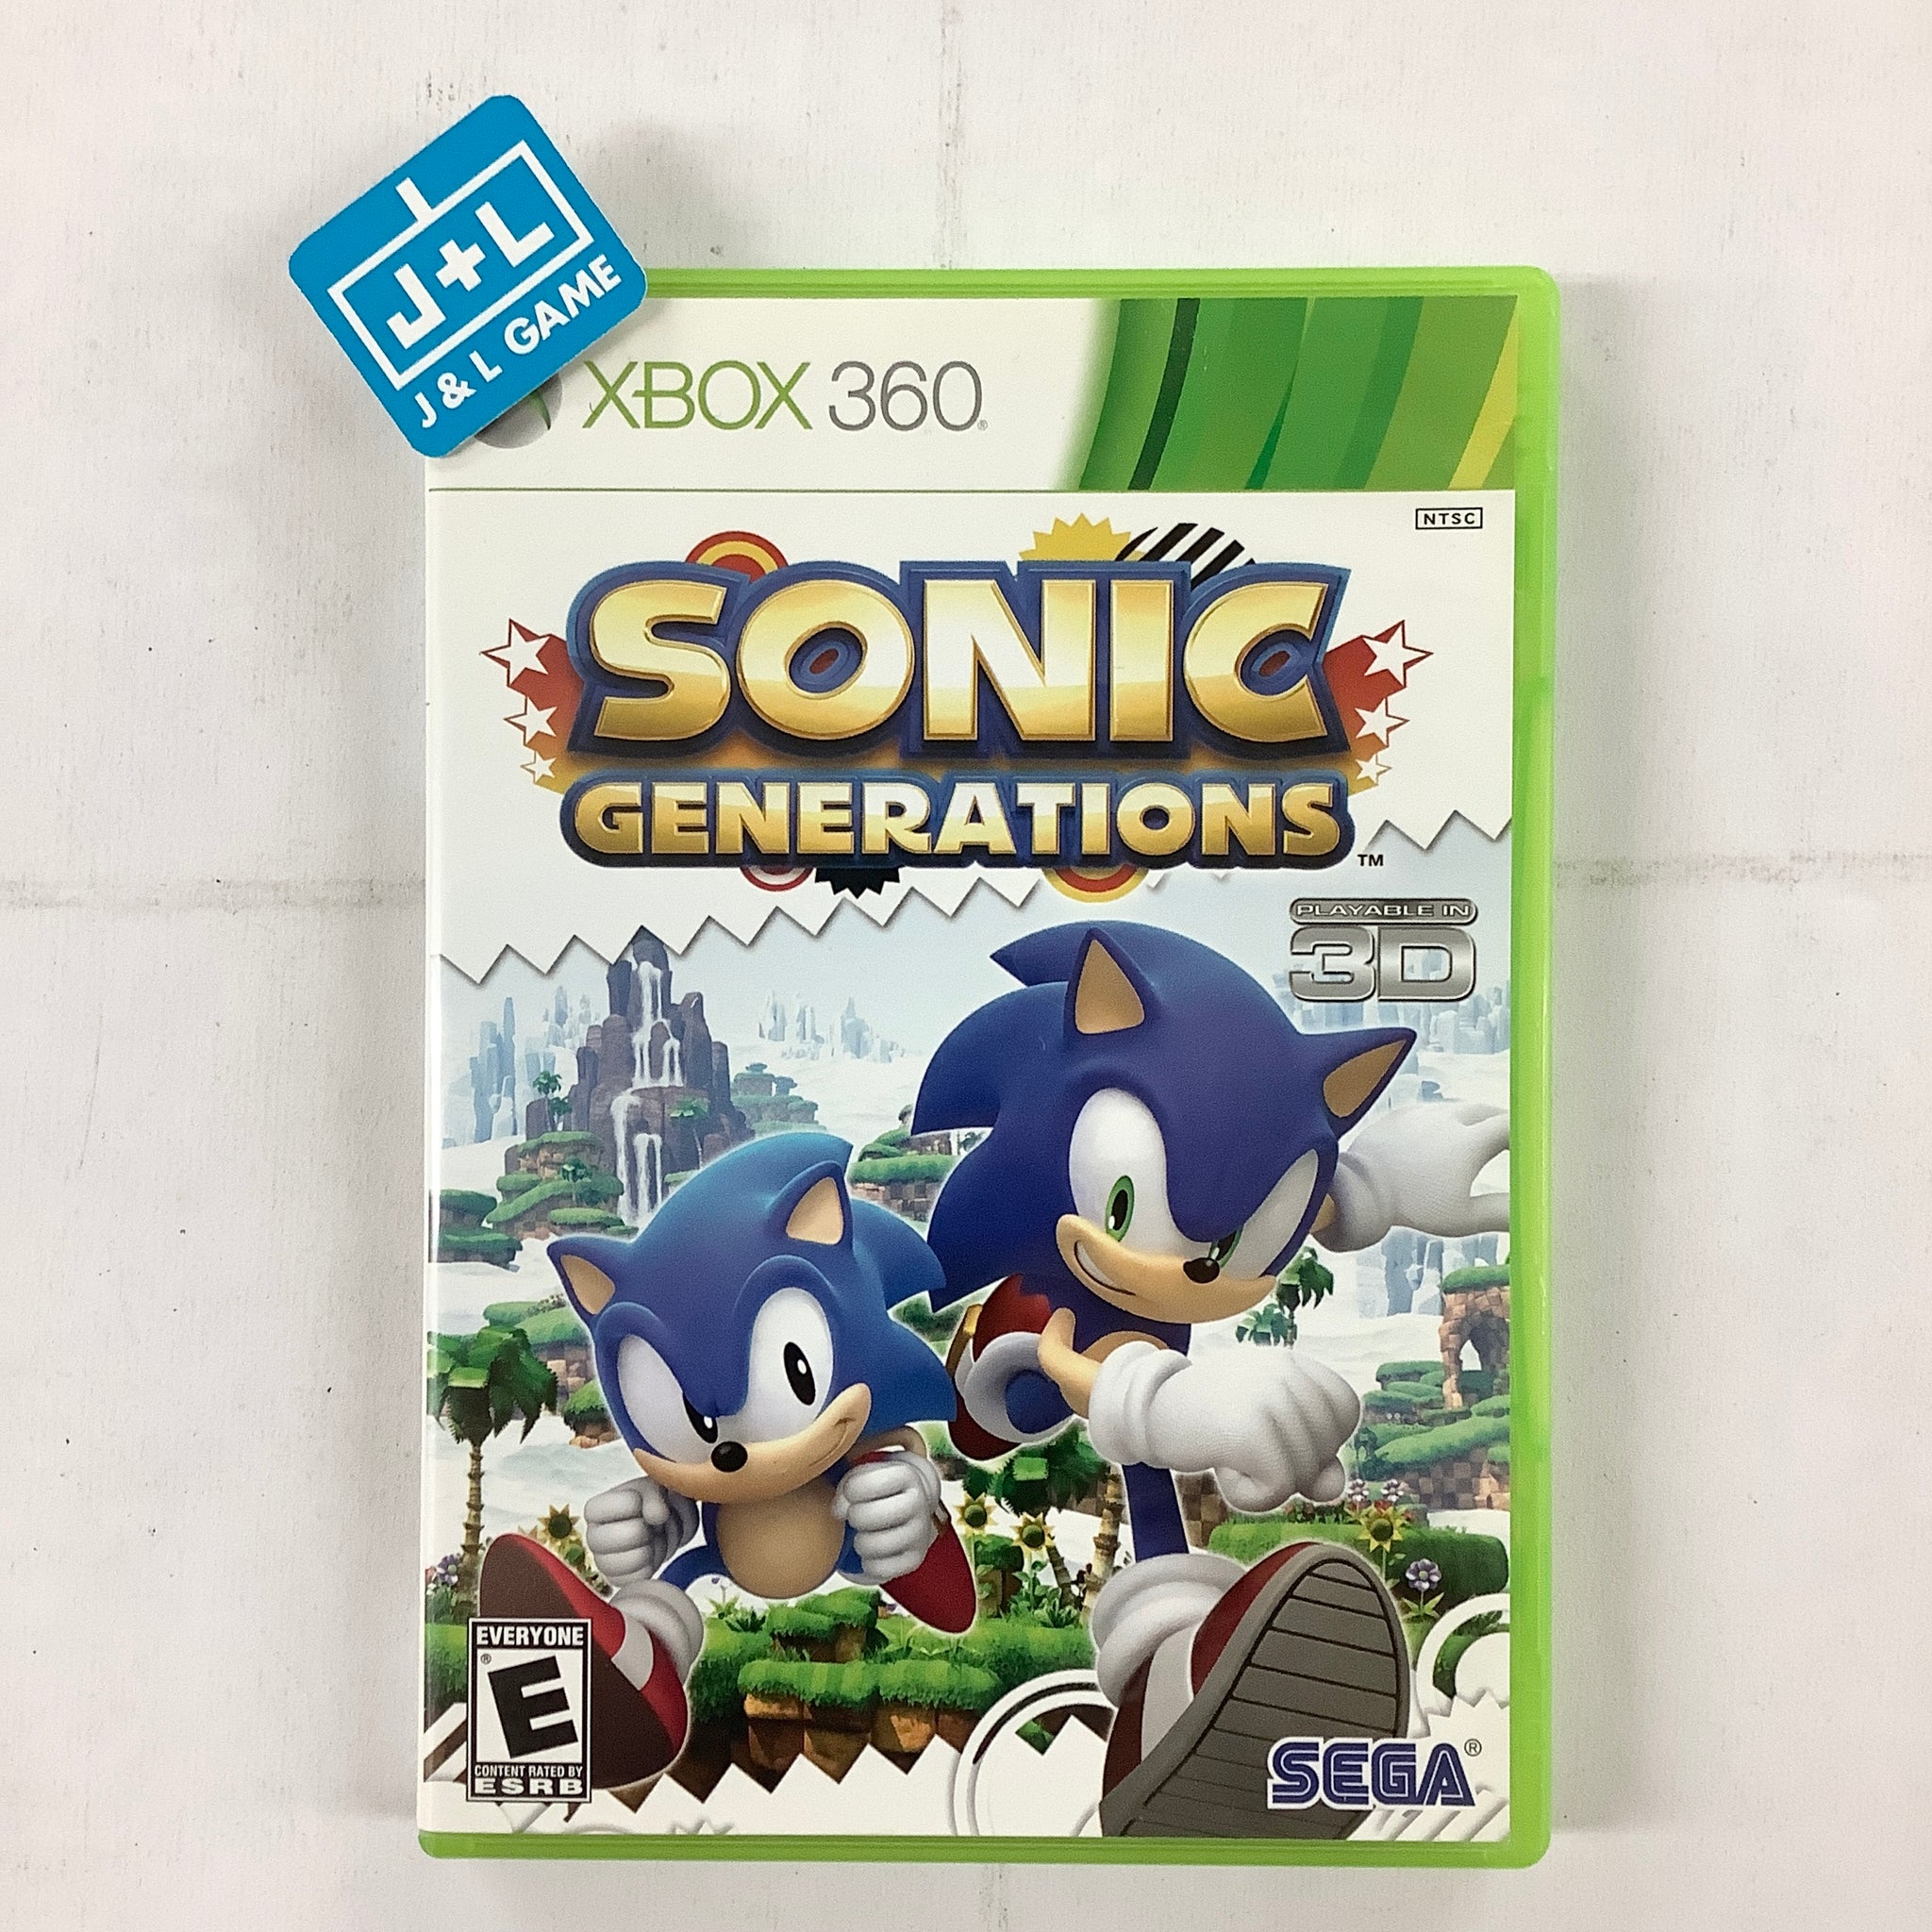 Sonic Ultimate Genesis Collection (Xbox 360) - Pre-Owned SEGA 